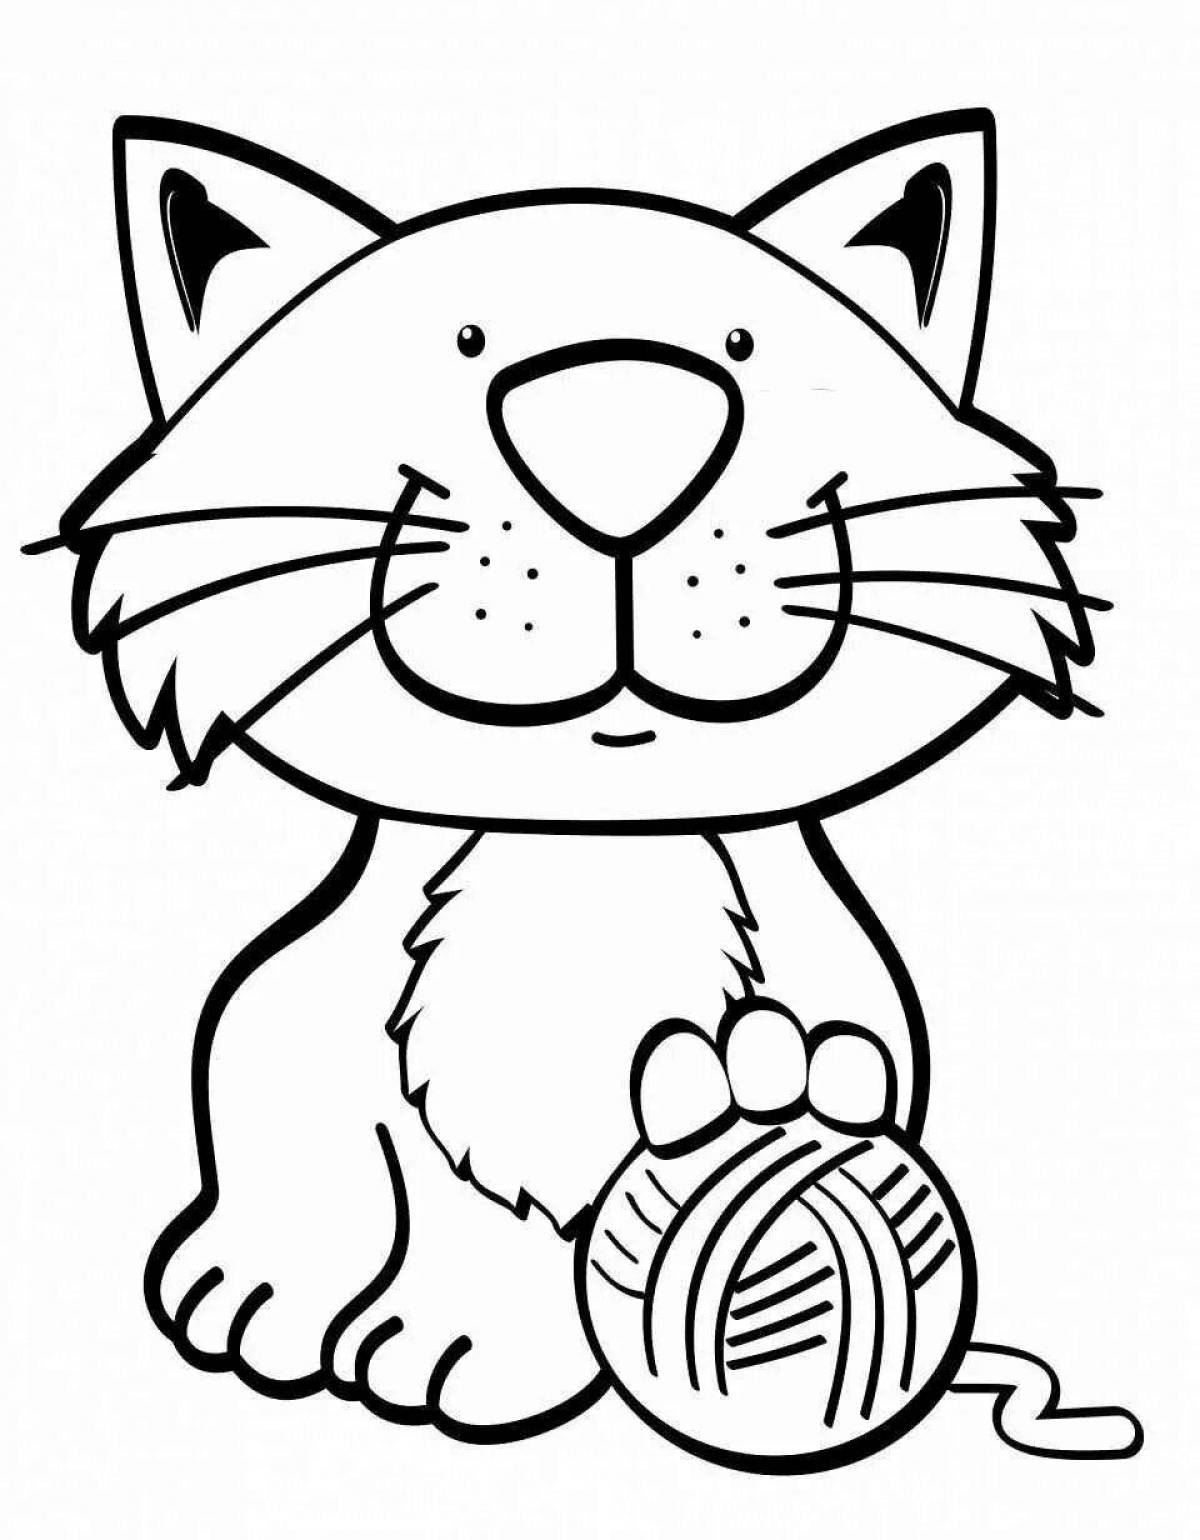 Coloring book playful black and white cat